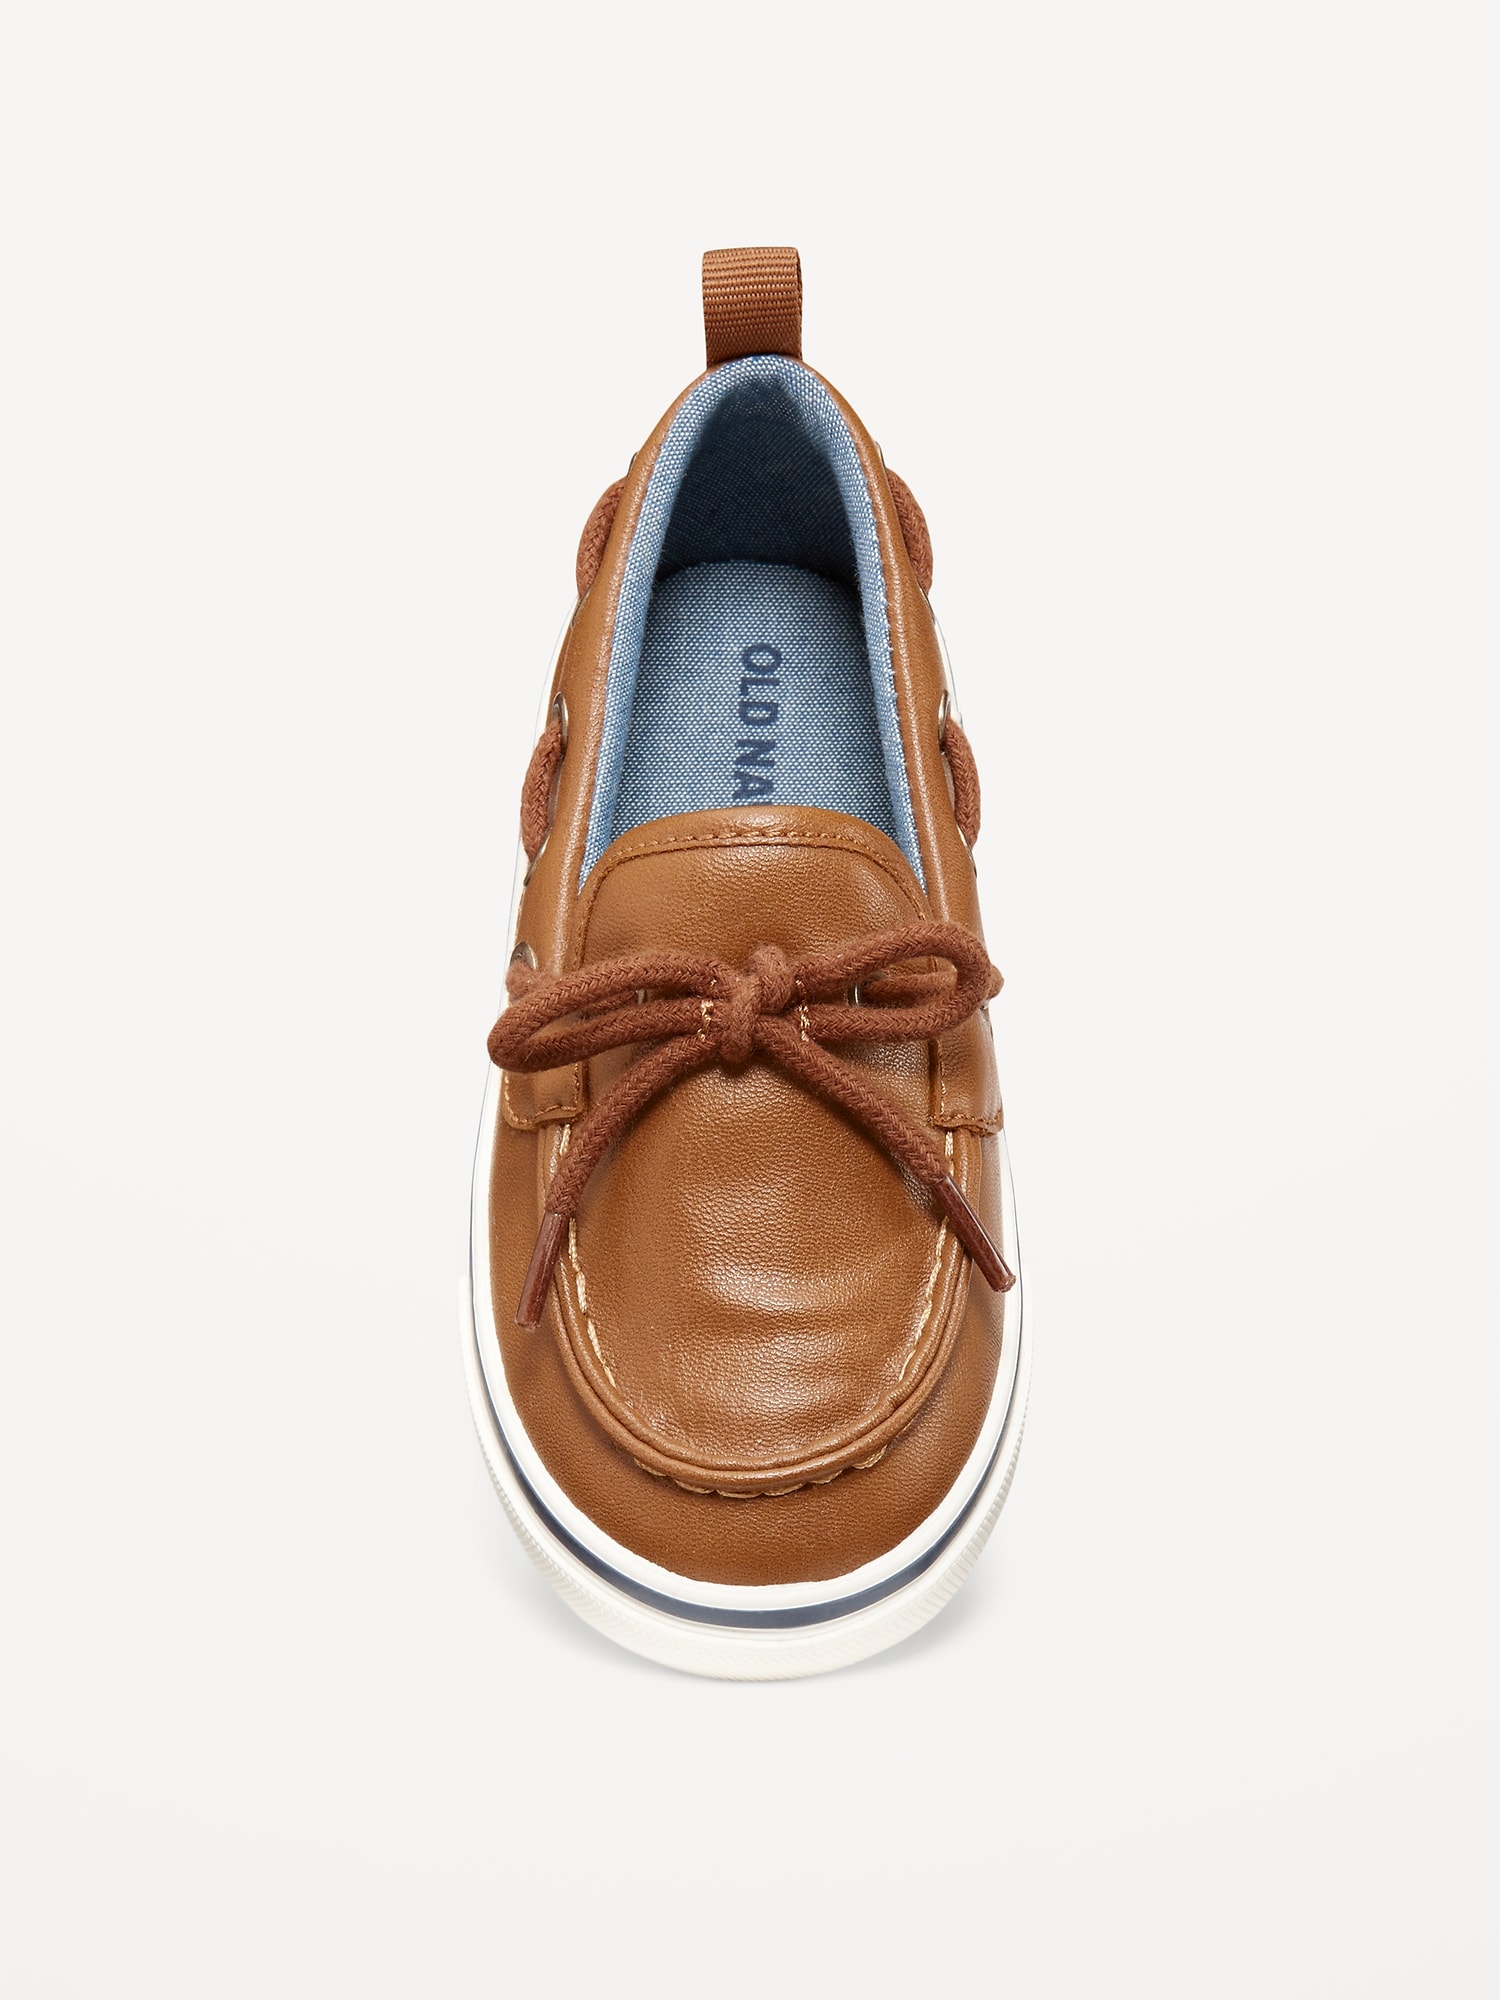 Faux-Leather Boat Shoes for Toddler Boys | Old Navy